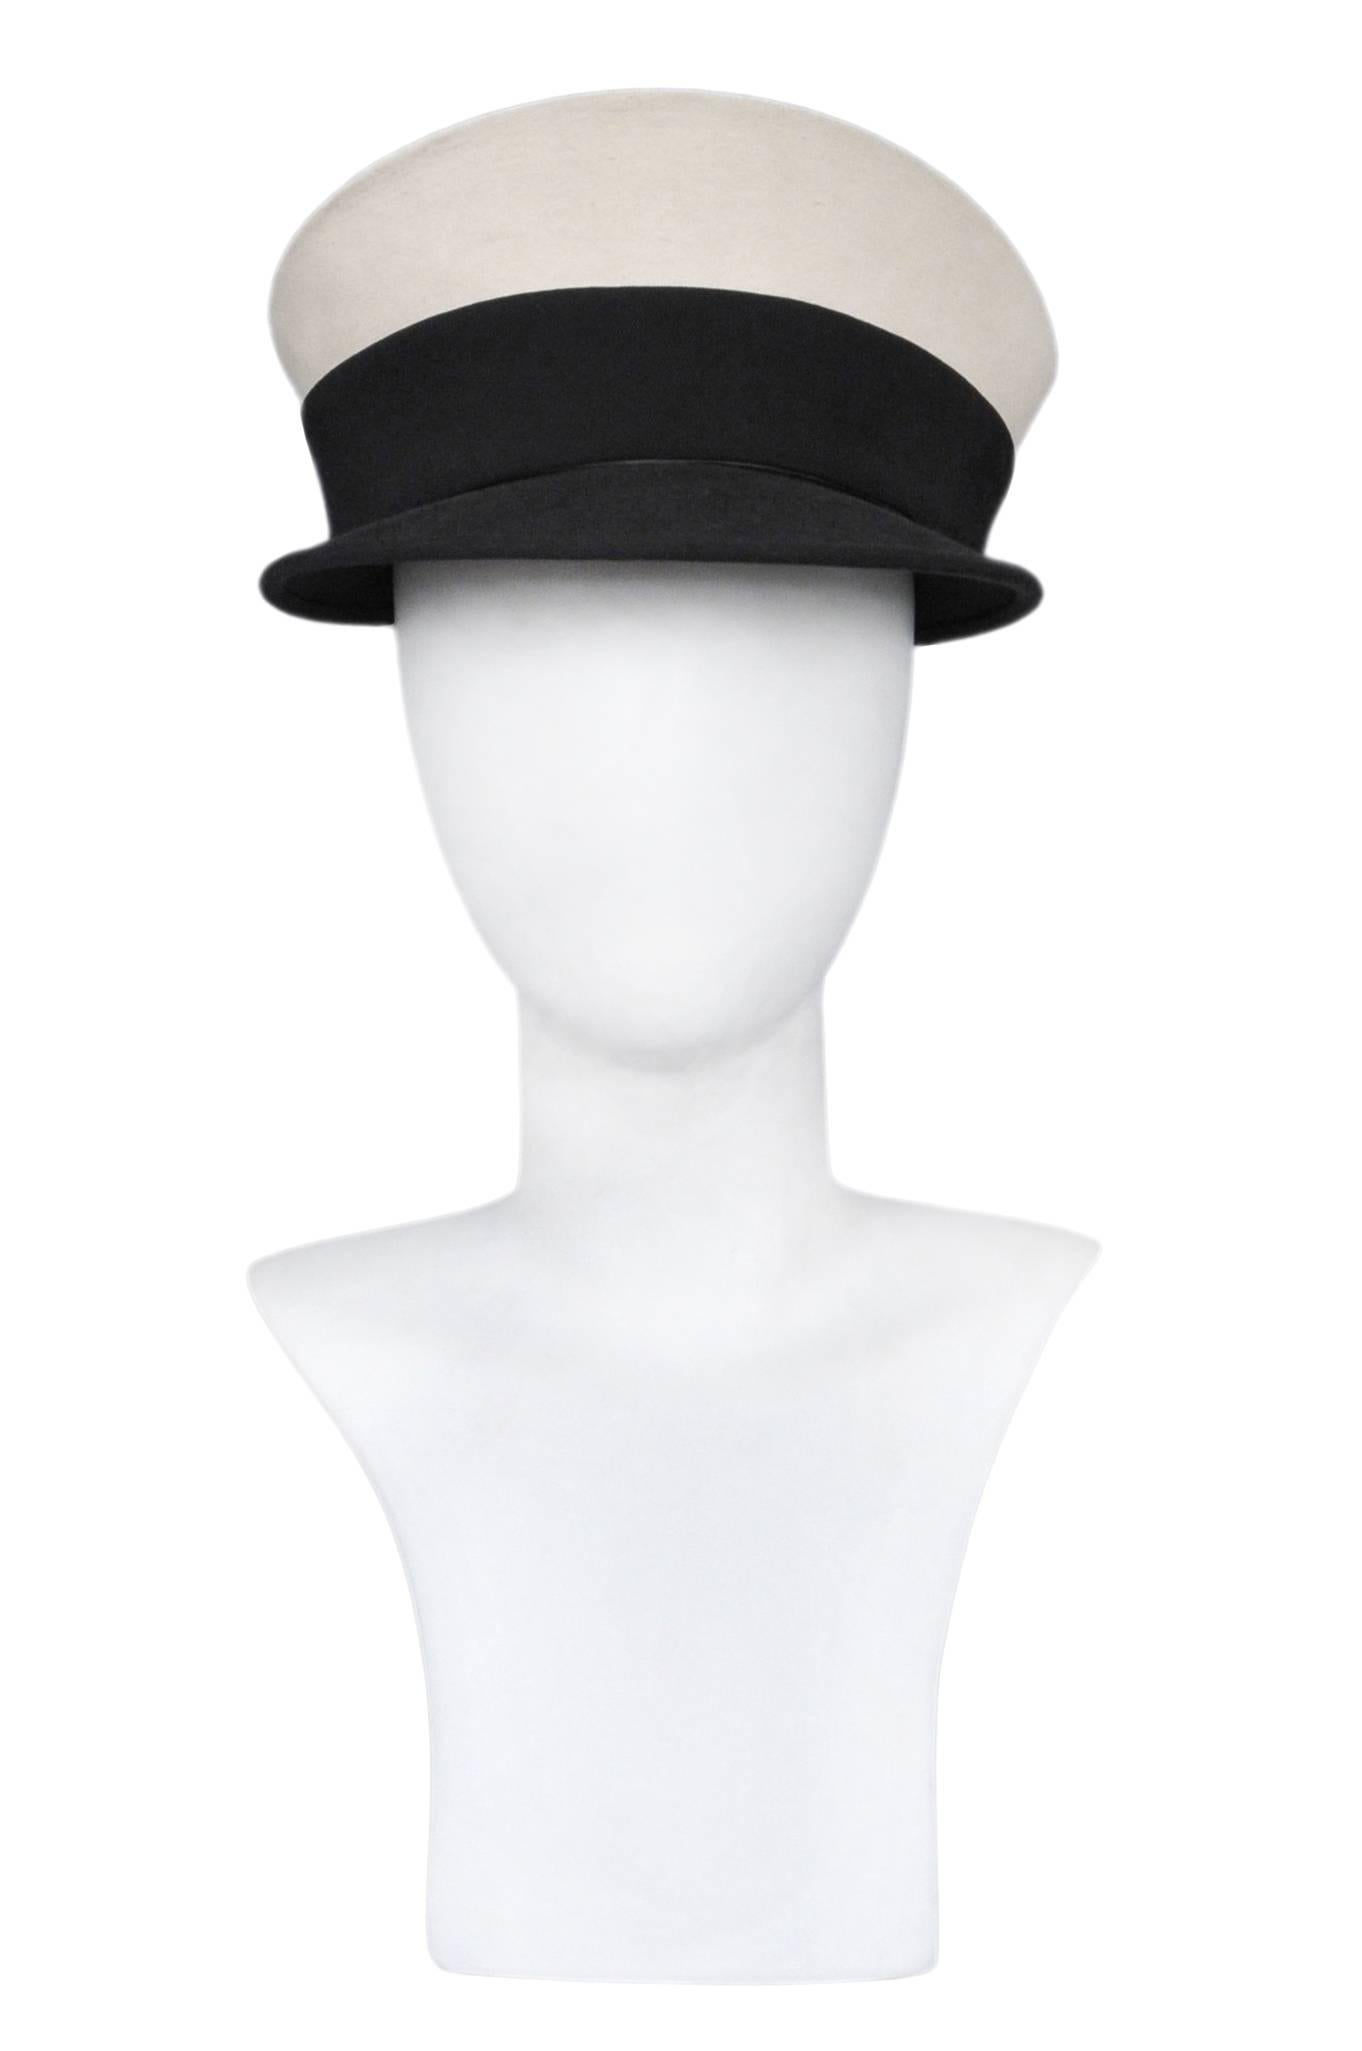 Gianfranco Ferre black & white sailor hat.
Please inquire for additional images.